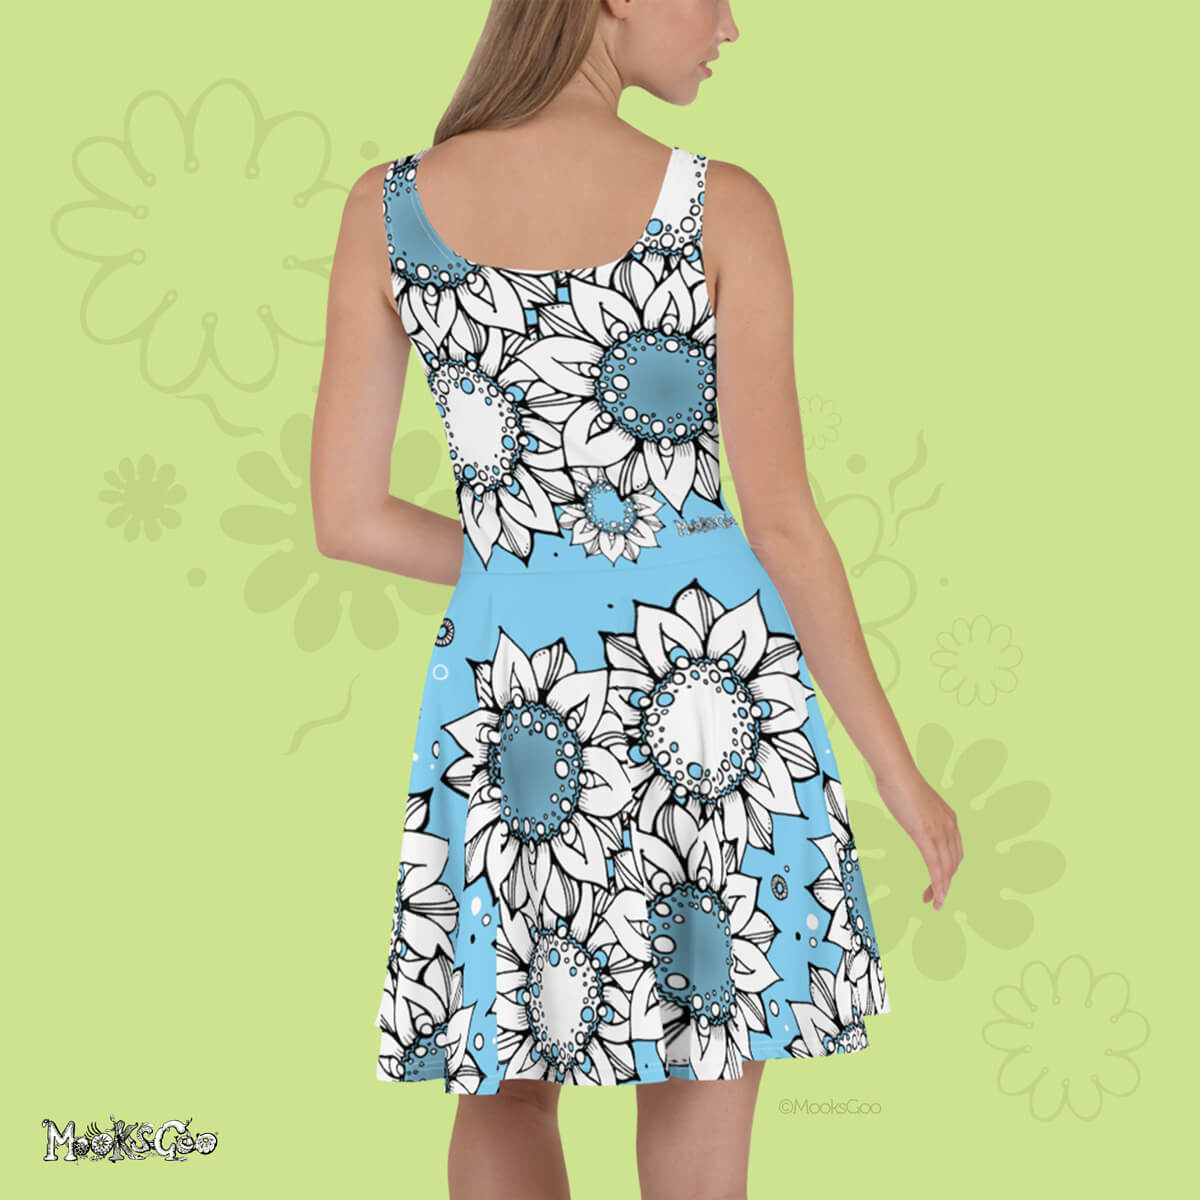 Back view of a Quirky and fun women's floaty light skater dress with hand drawn illustrated black and white sunflowers, dots and wheels, designed by MooksGoo